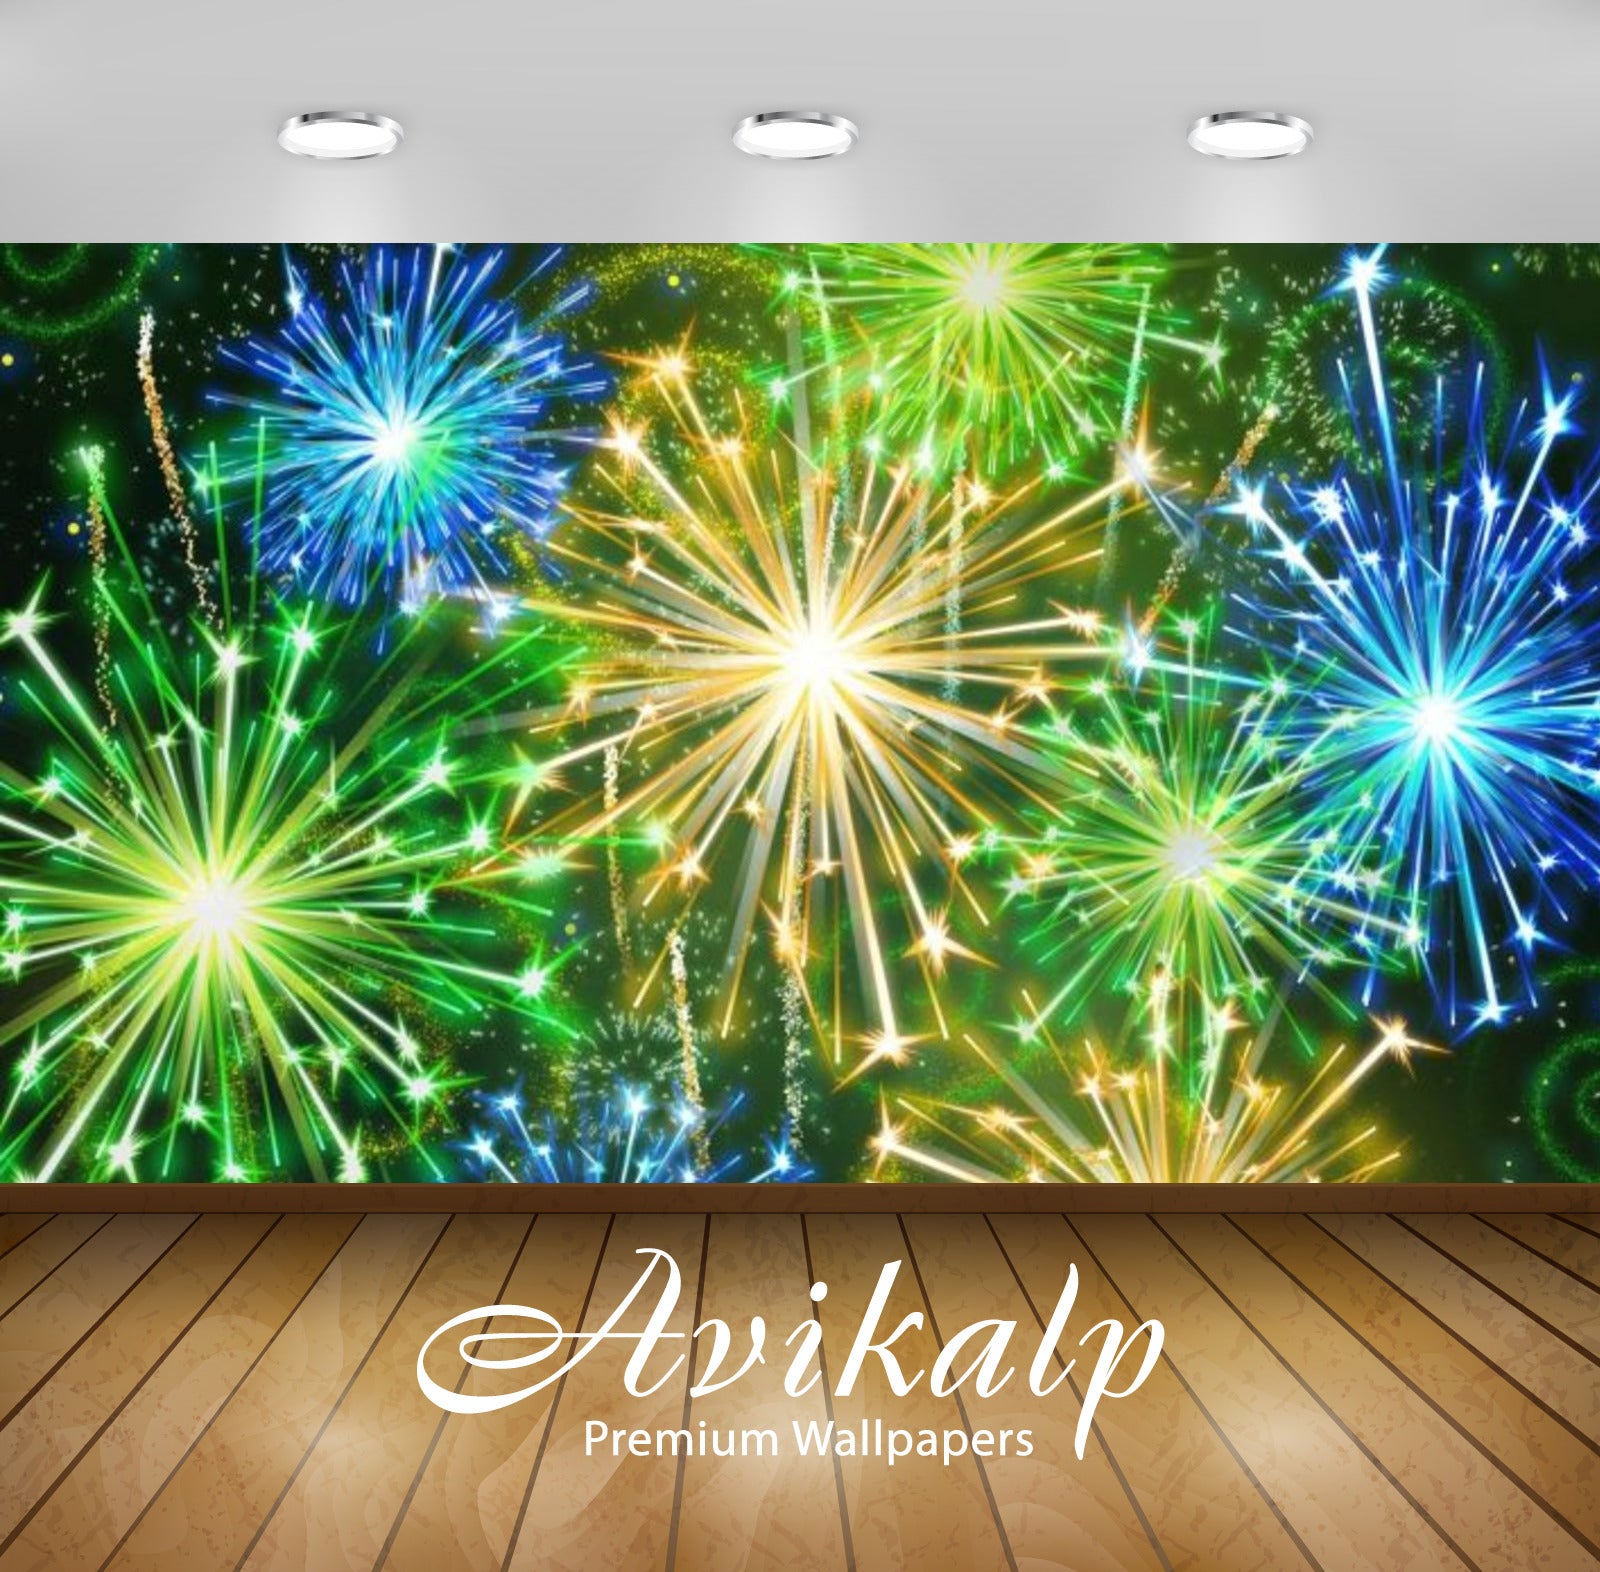 Avikalp Exclusive Awi2515 Colorful Fireworks Yellow Green Blue Flash Full HD Wallpapers for Living r